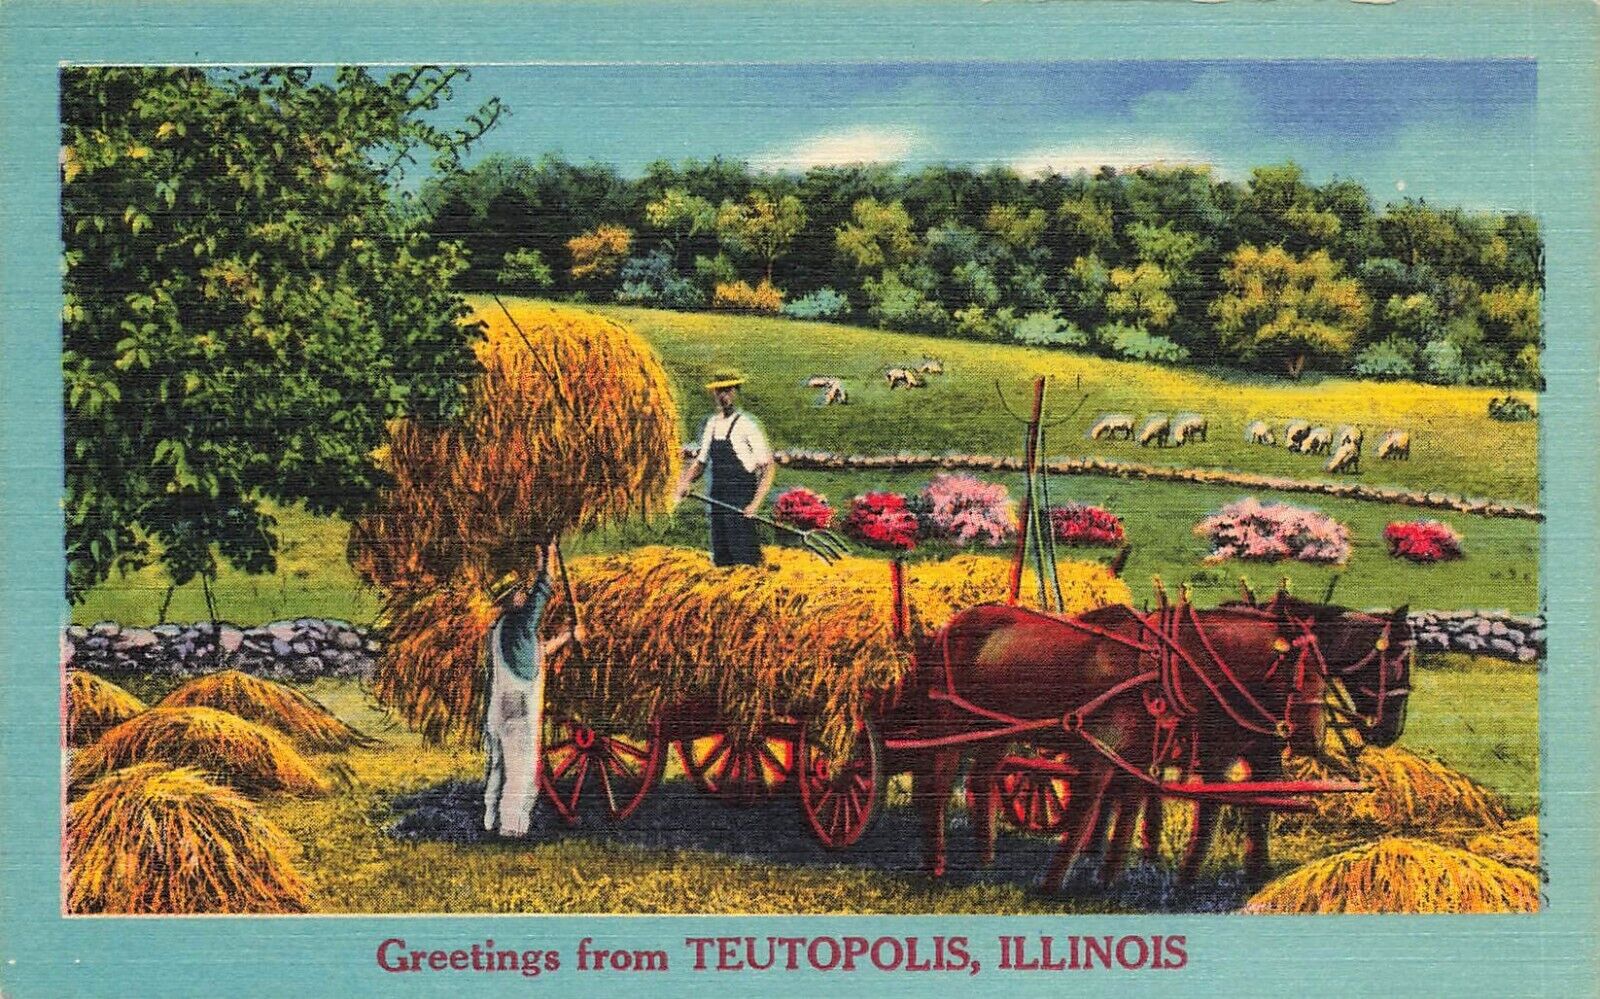 ILLINOIS POSTCARD: VIEW OF FARMERS WORKING GREETINGS FROM TEUTOPOLIS, IL